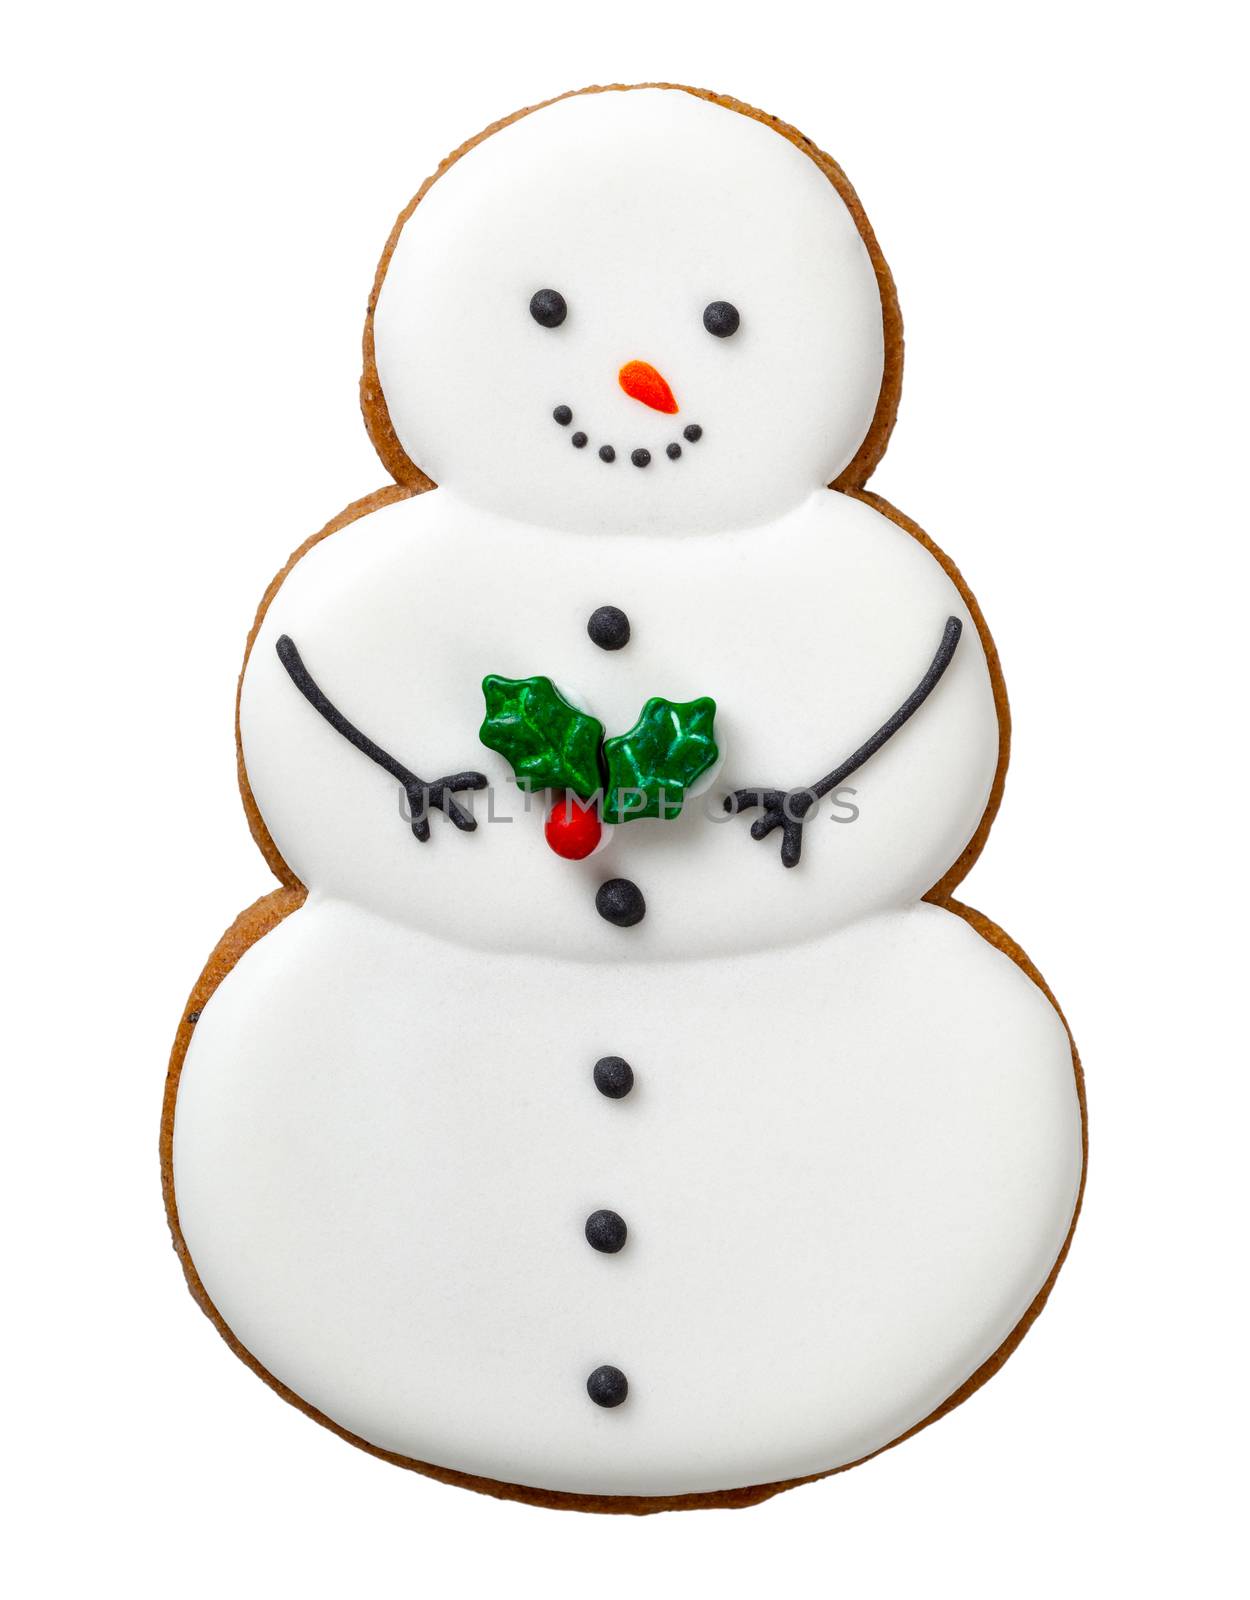 Christmas gingerbread cookie isolated on white background. Snowman shape cookie